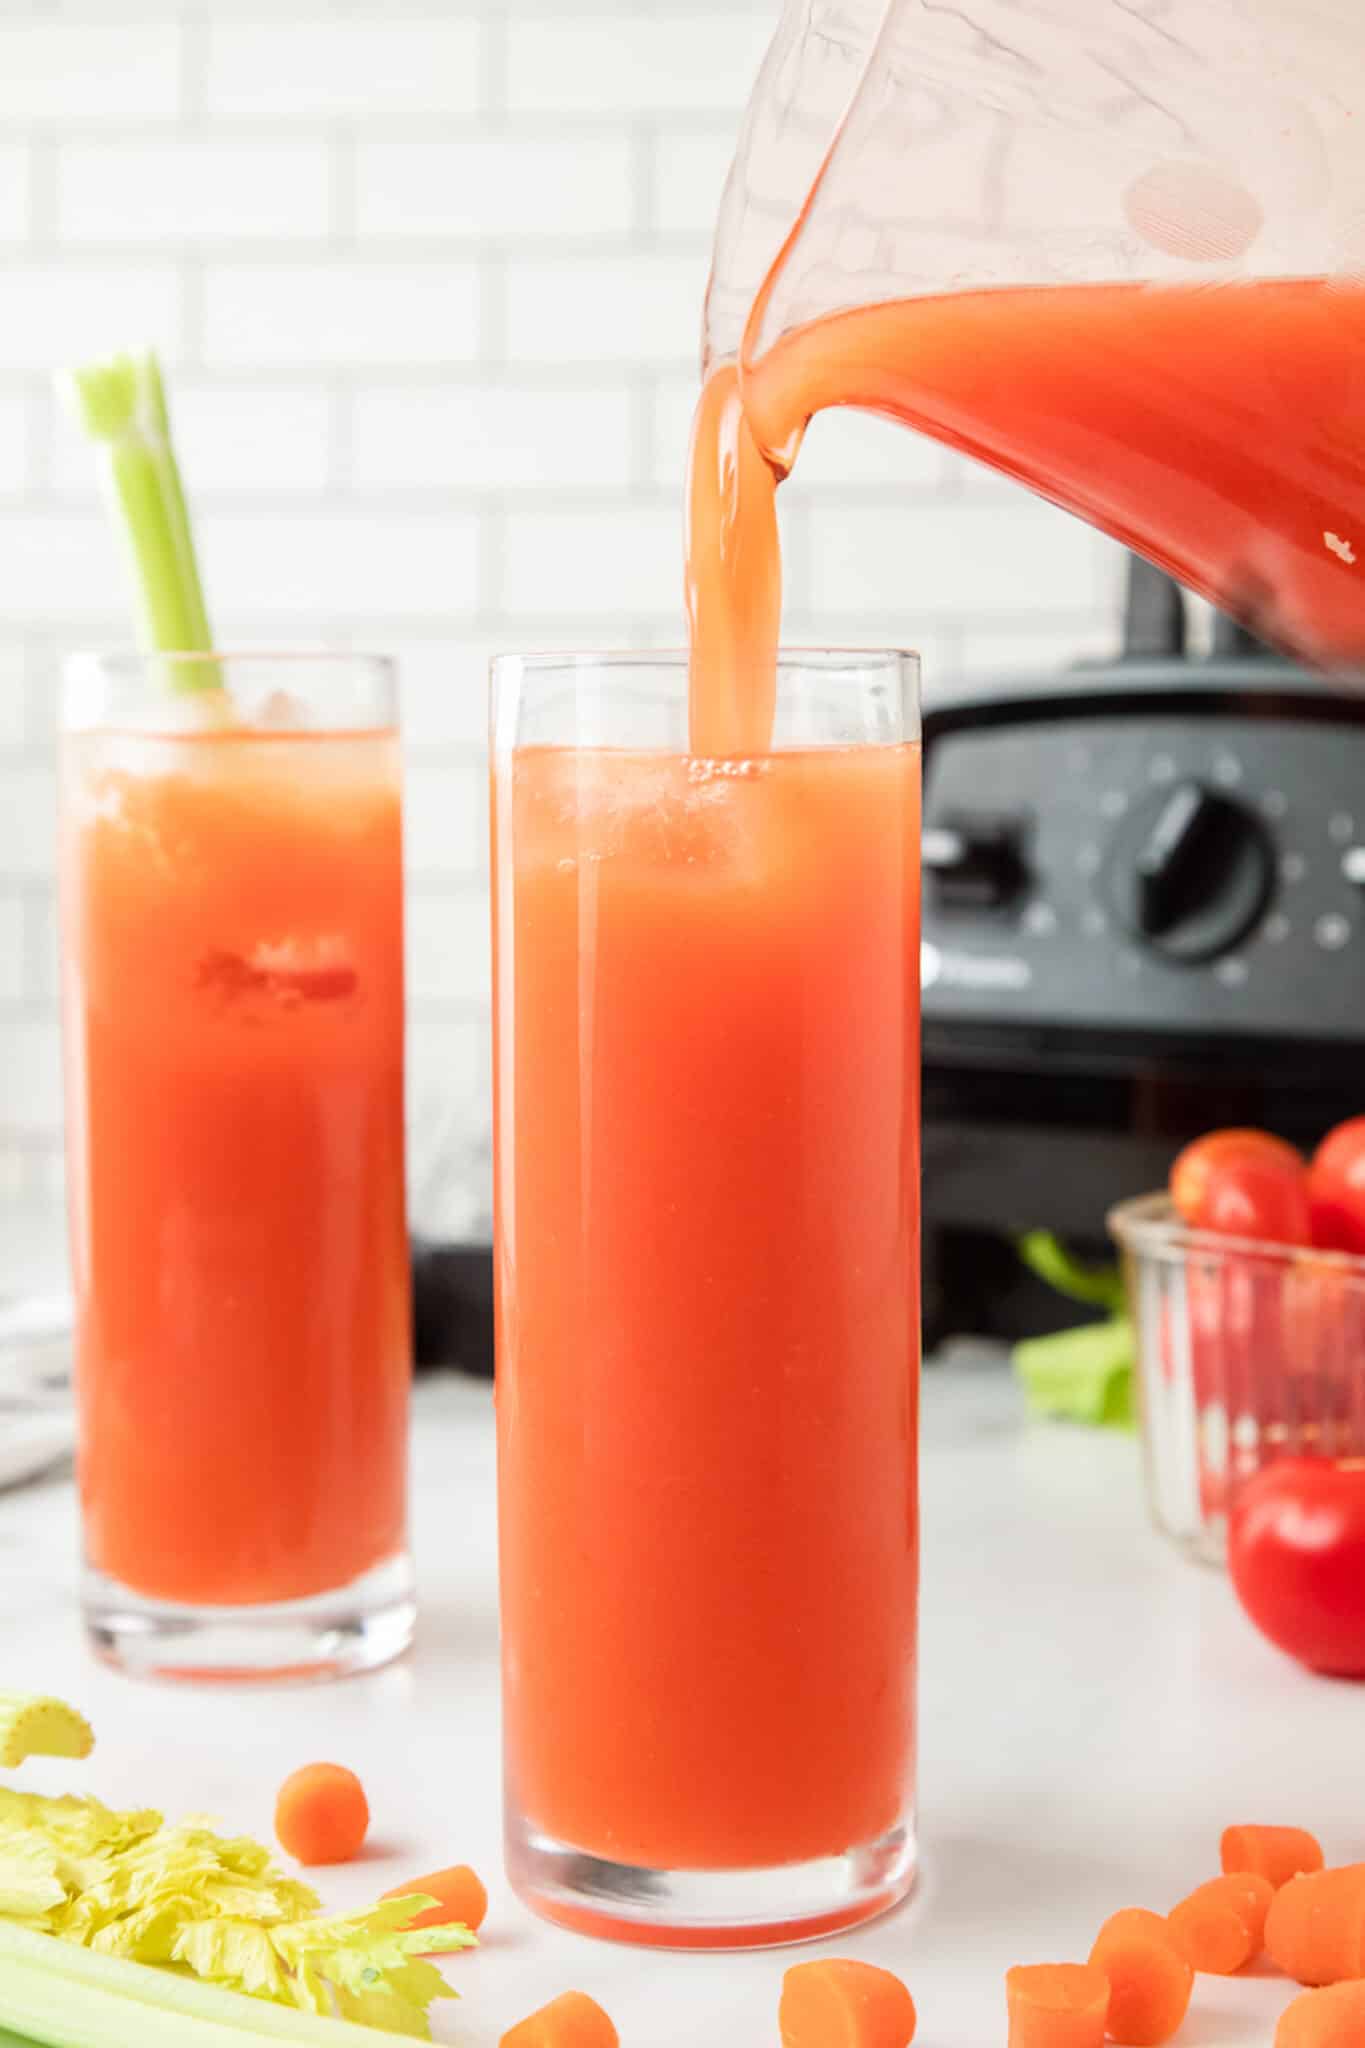 pouring two glasses of tomato juice.